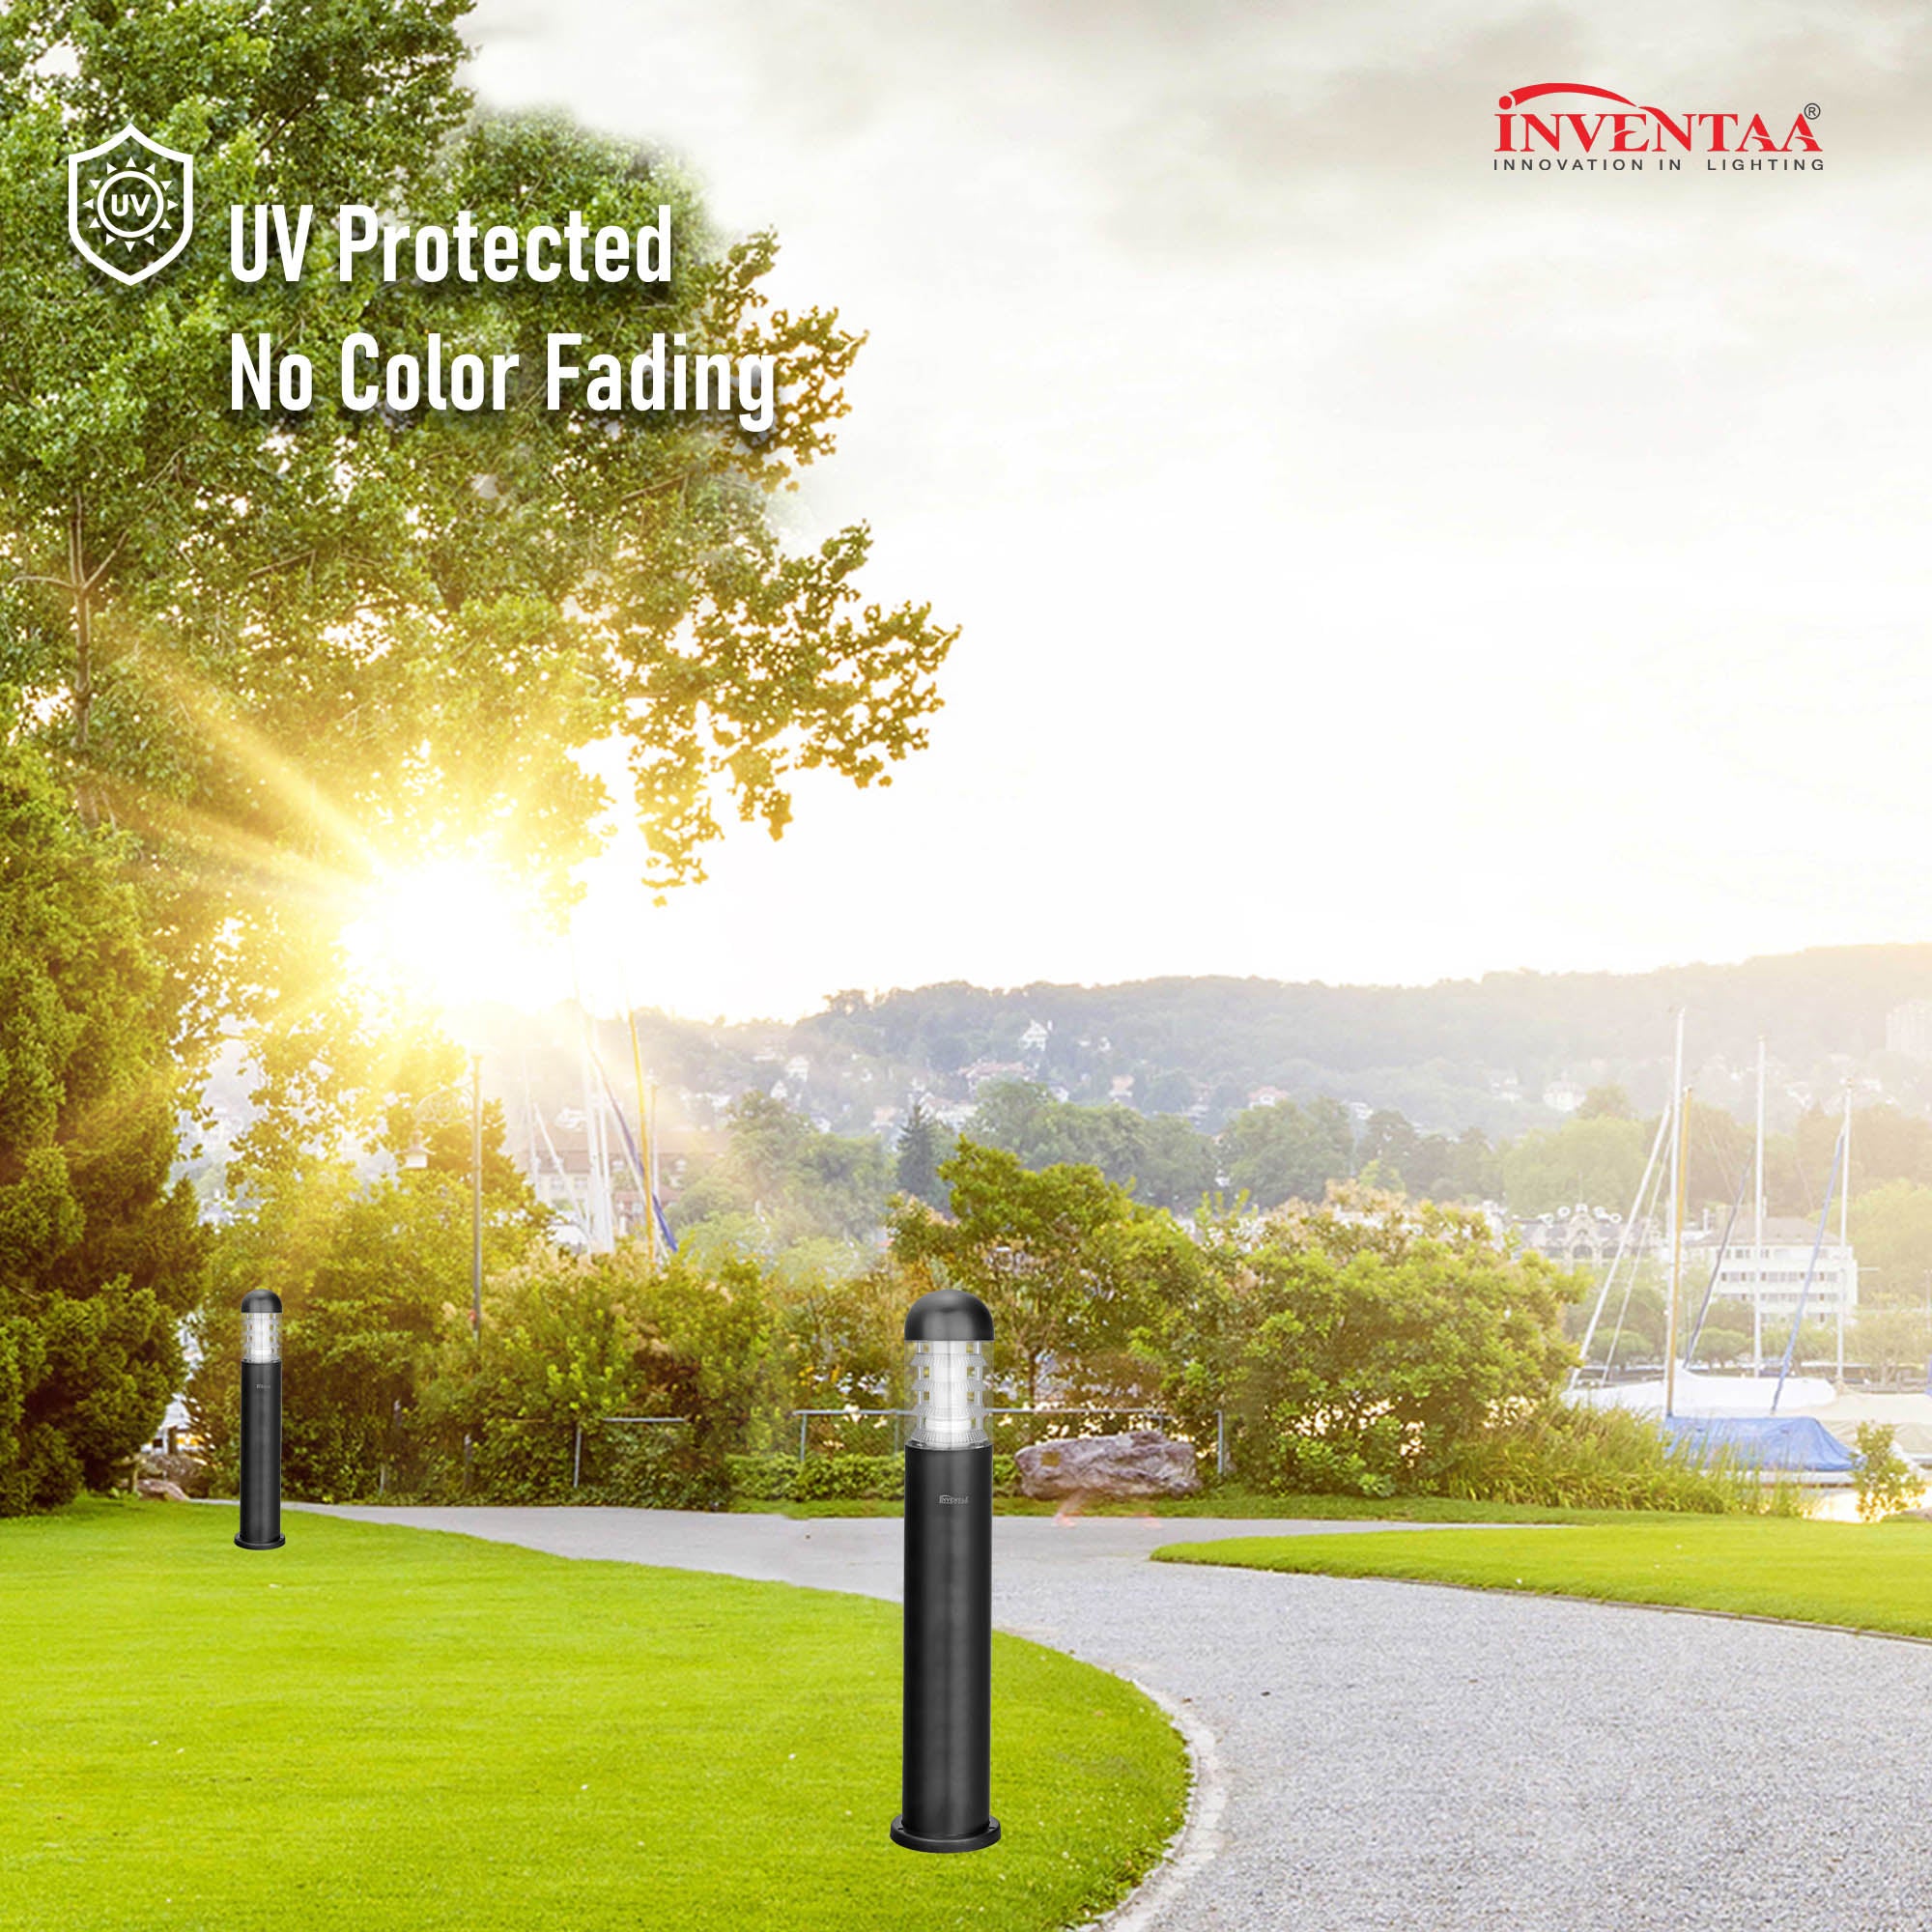 Electra 1 feet led garden bollard featuring its UV protection and color fading resistant feature #size_1 feet